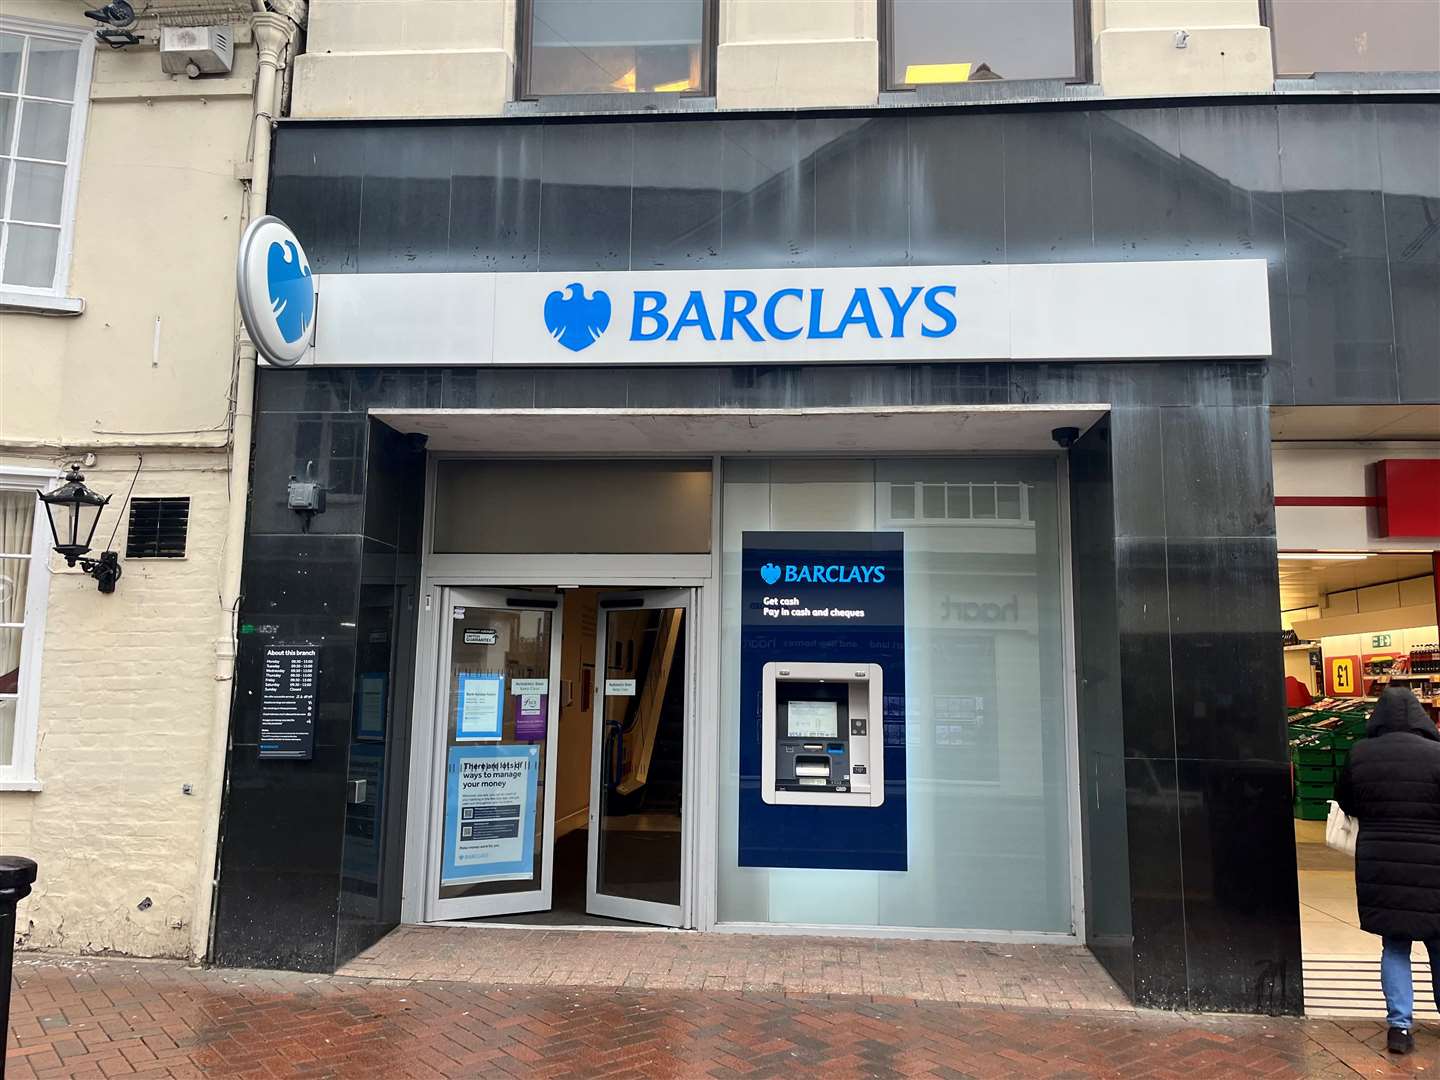 An elderly woman was scammed out of £800 after she was targeted by fraudsters at a cash machine outside Barclays in Ashford